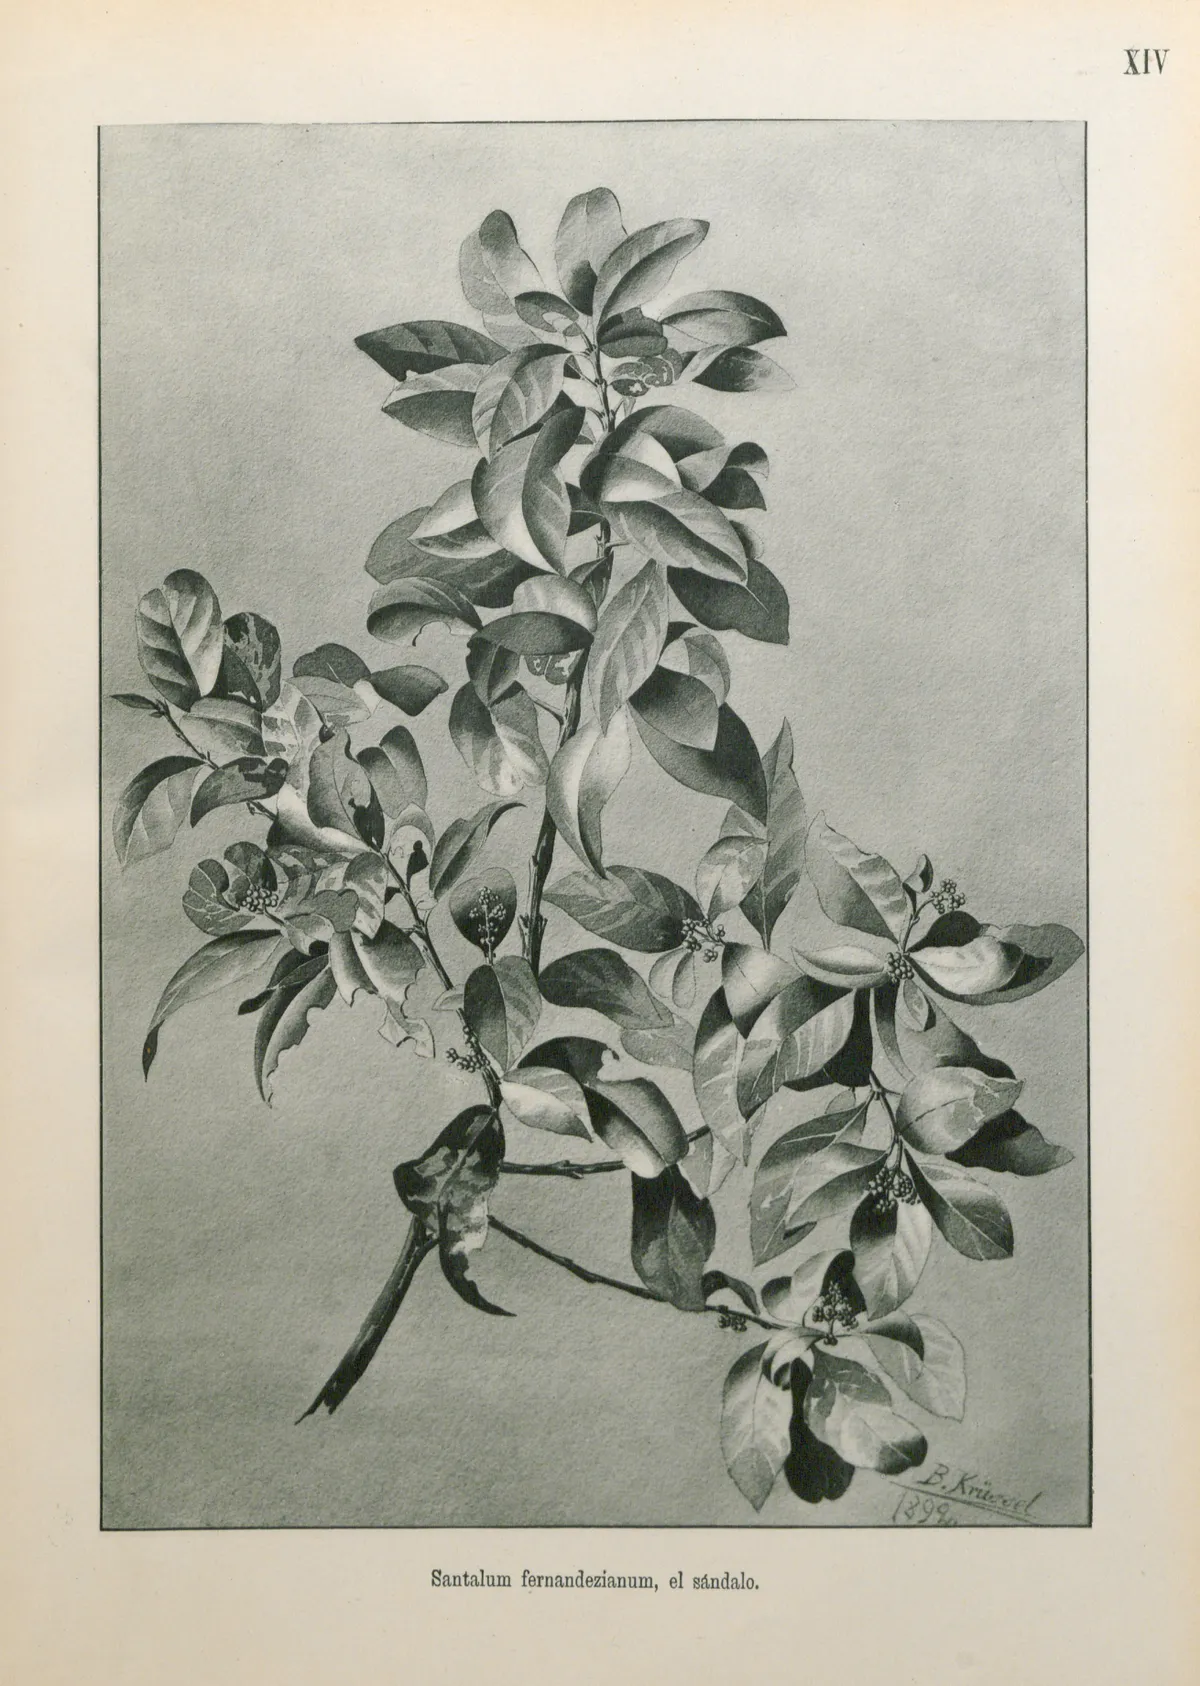 The Chile sandalwood was harvested for its aromatic sandalwood and has not been seen since 1908. © Royal Botanic Gardens, Kew